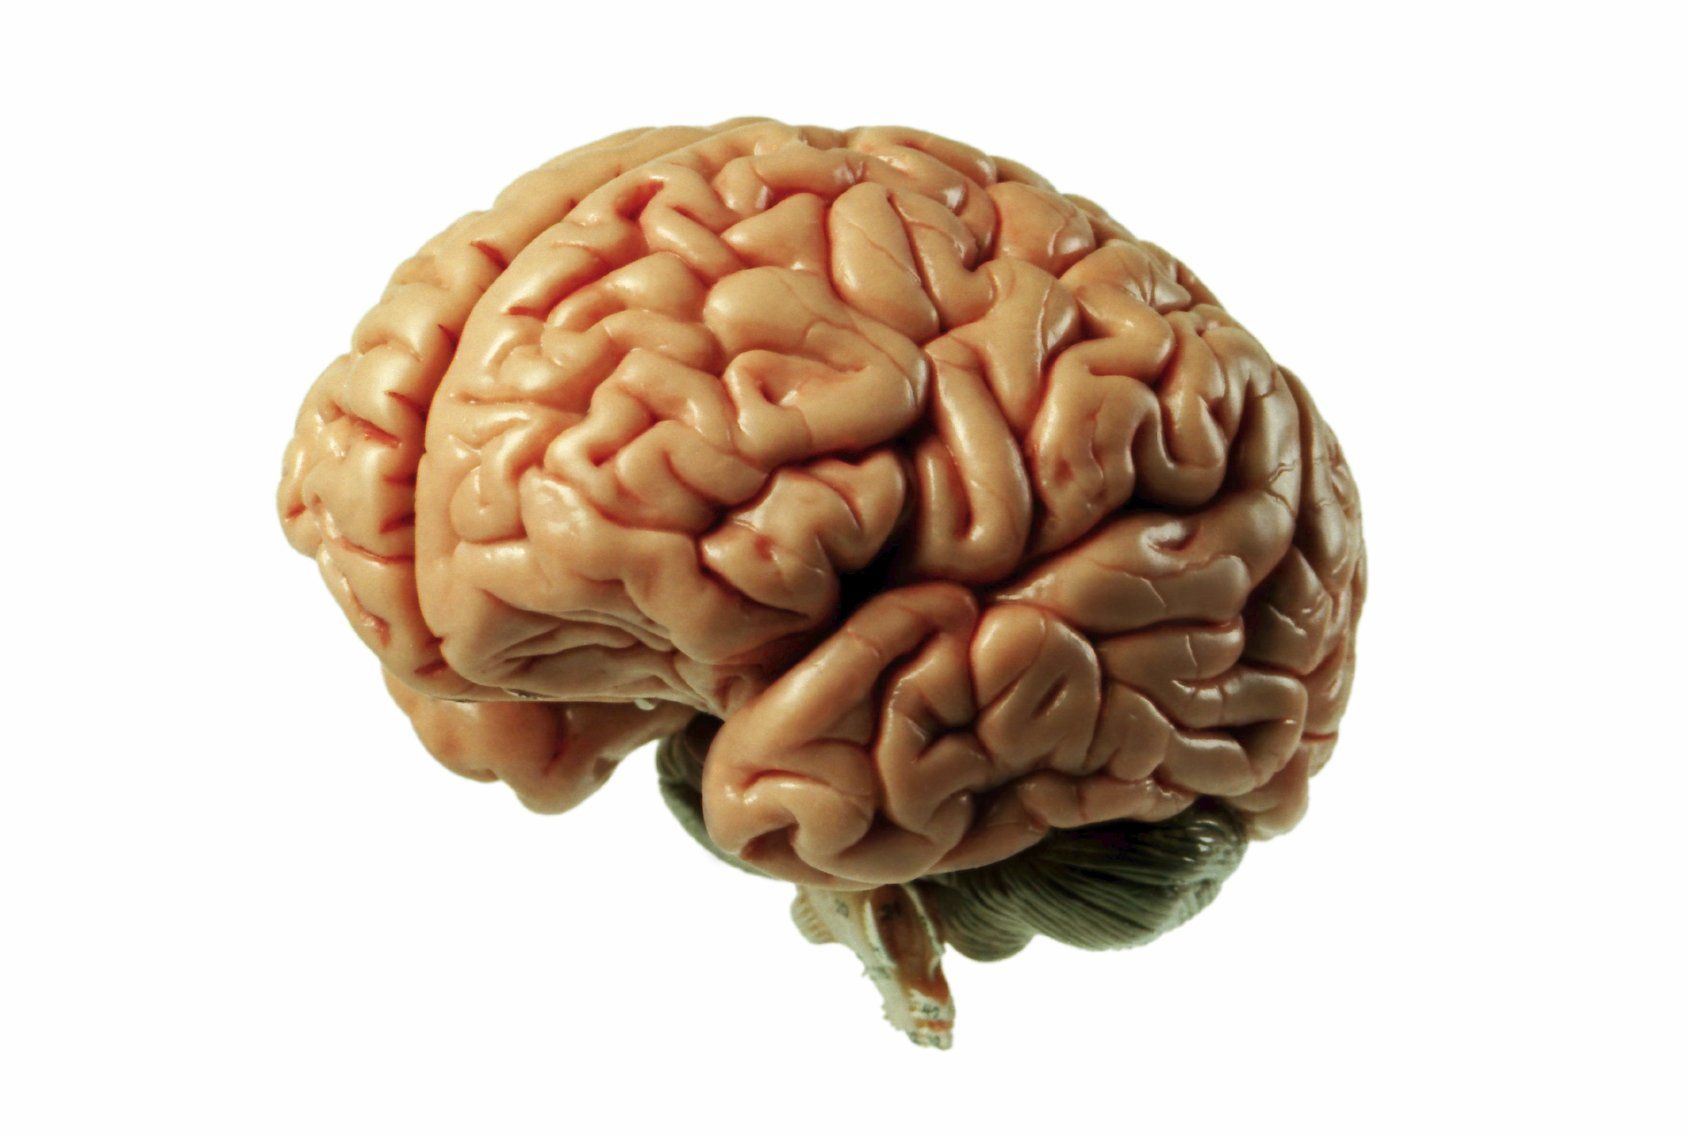 Photo of a fully in-tact human brain